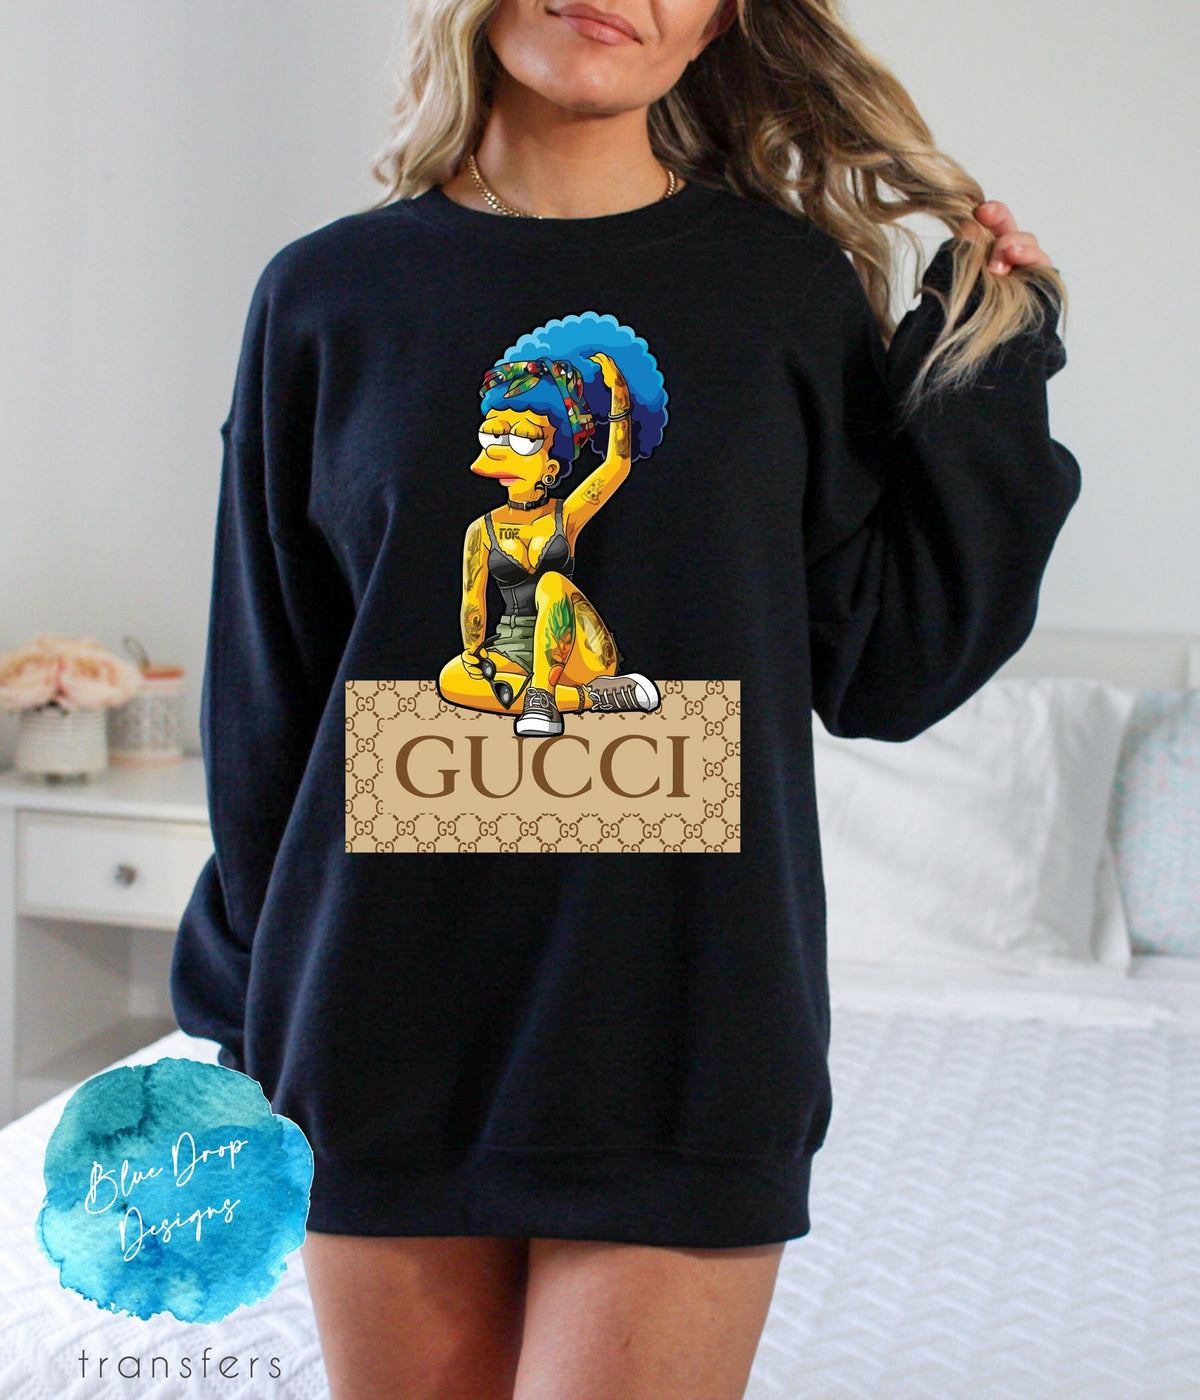 Marge Gucci Full Colour Transfer Direct to Film Colour Transfer Blue Drop Designs 